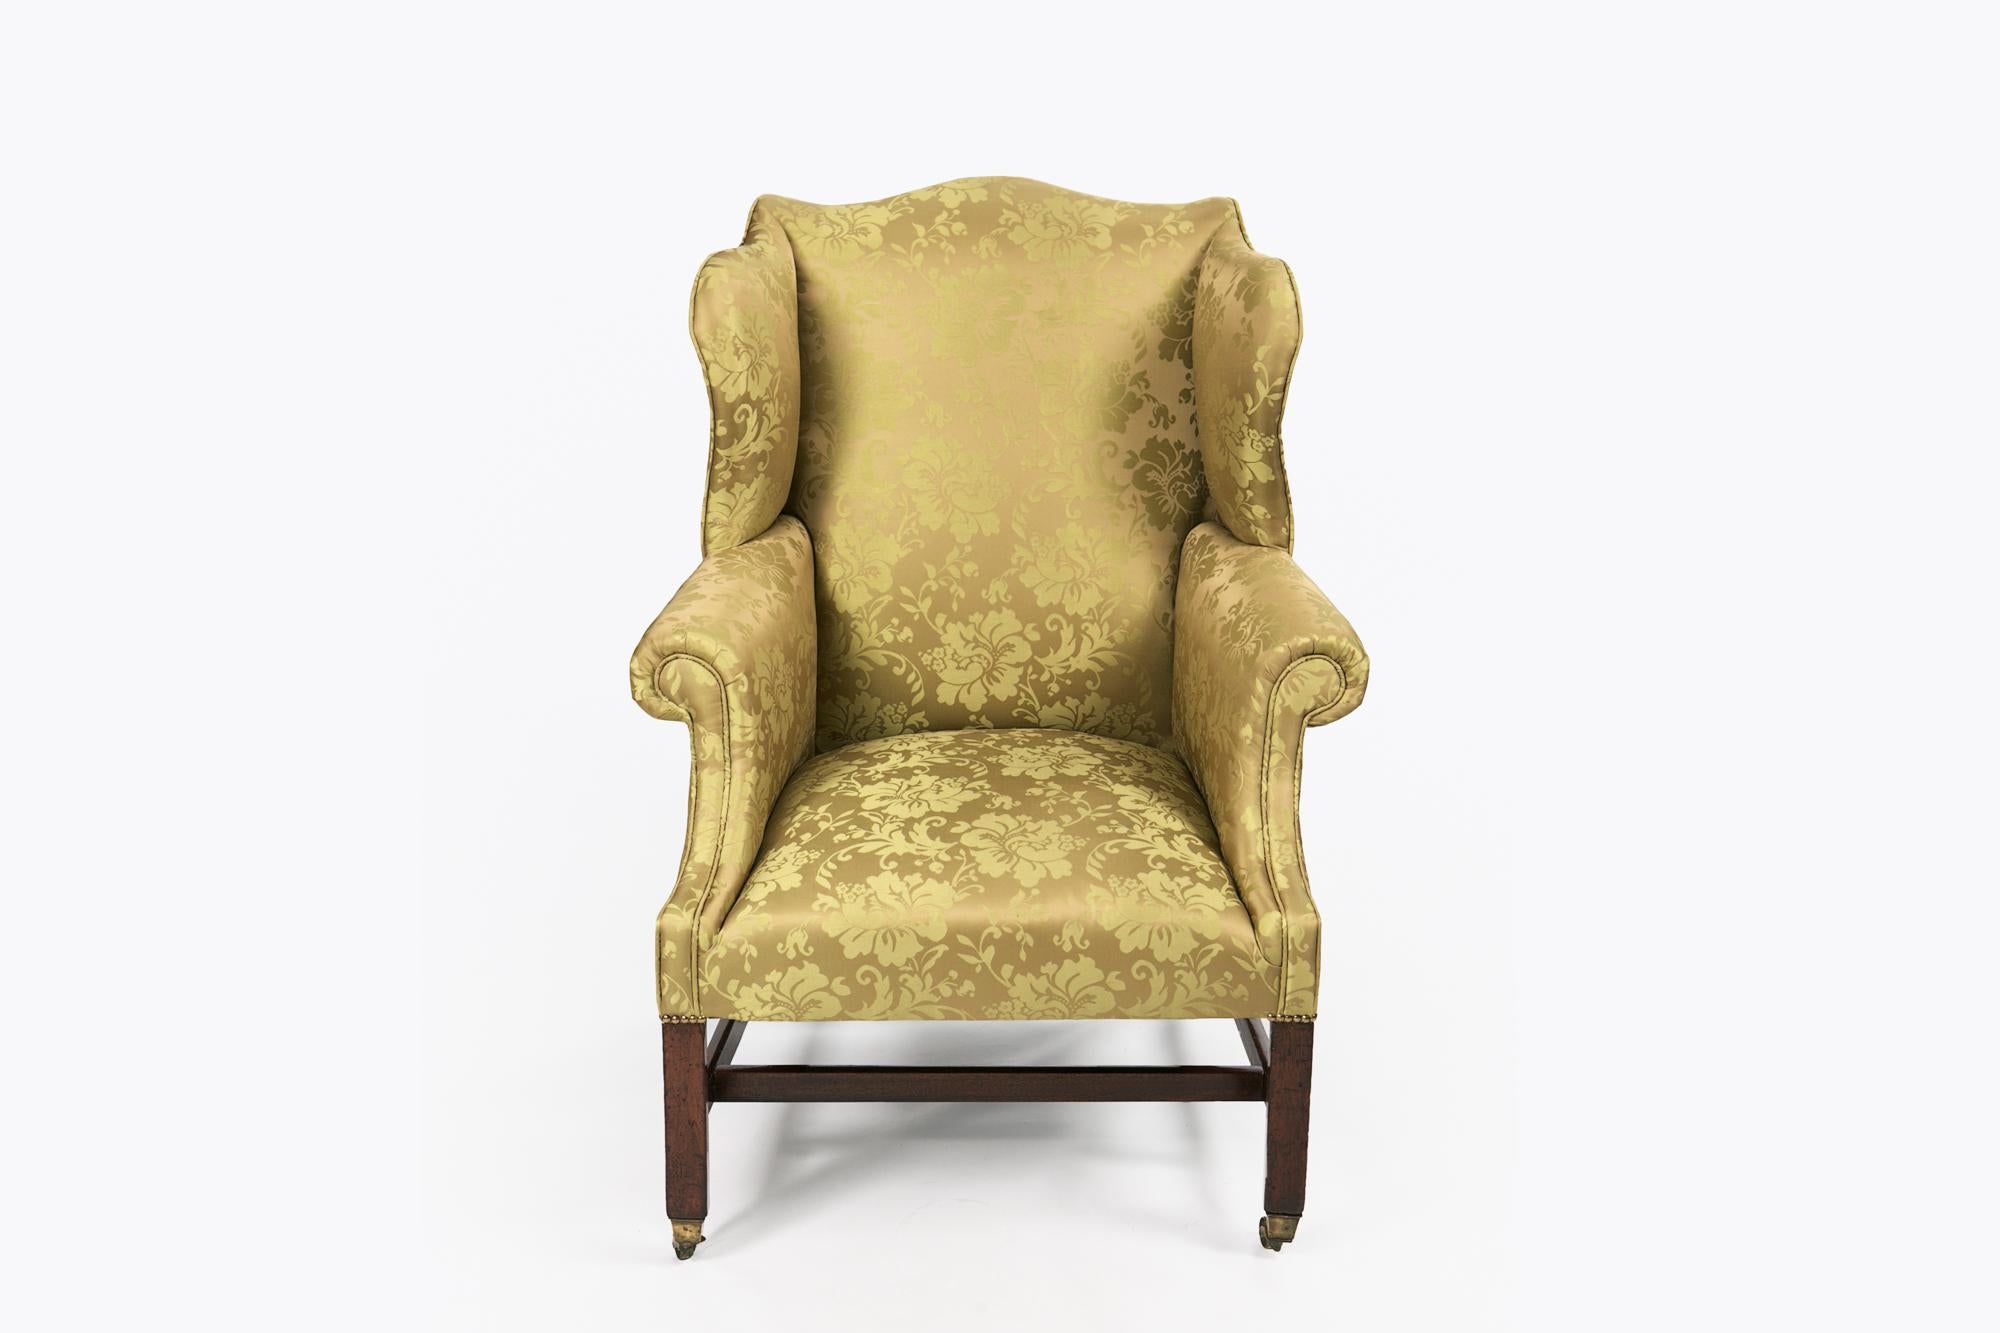 Early 19th century George III wing chair, the shaped back without scrolled wings and arms raised over squared leg joined with H stretcher terminating on brass casters.